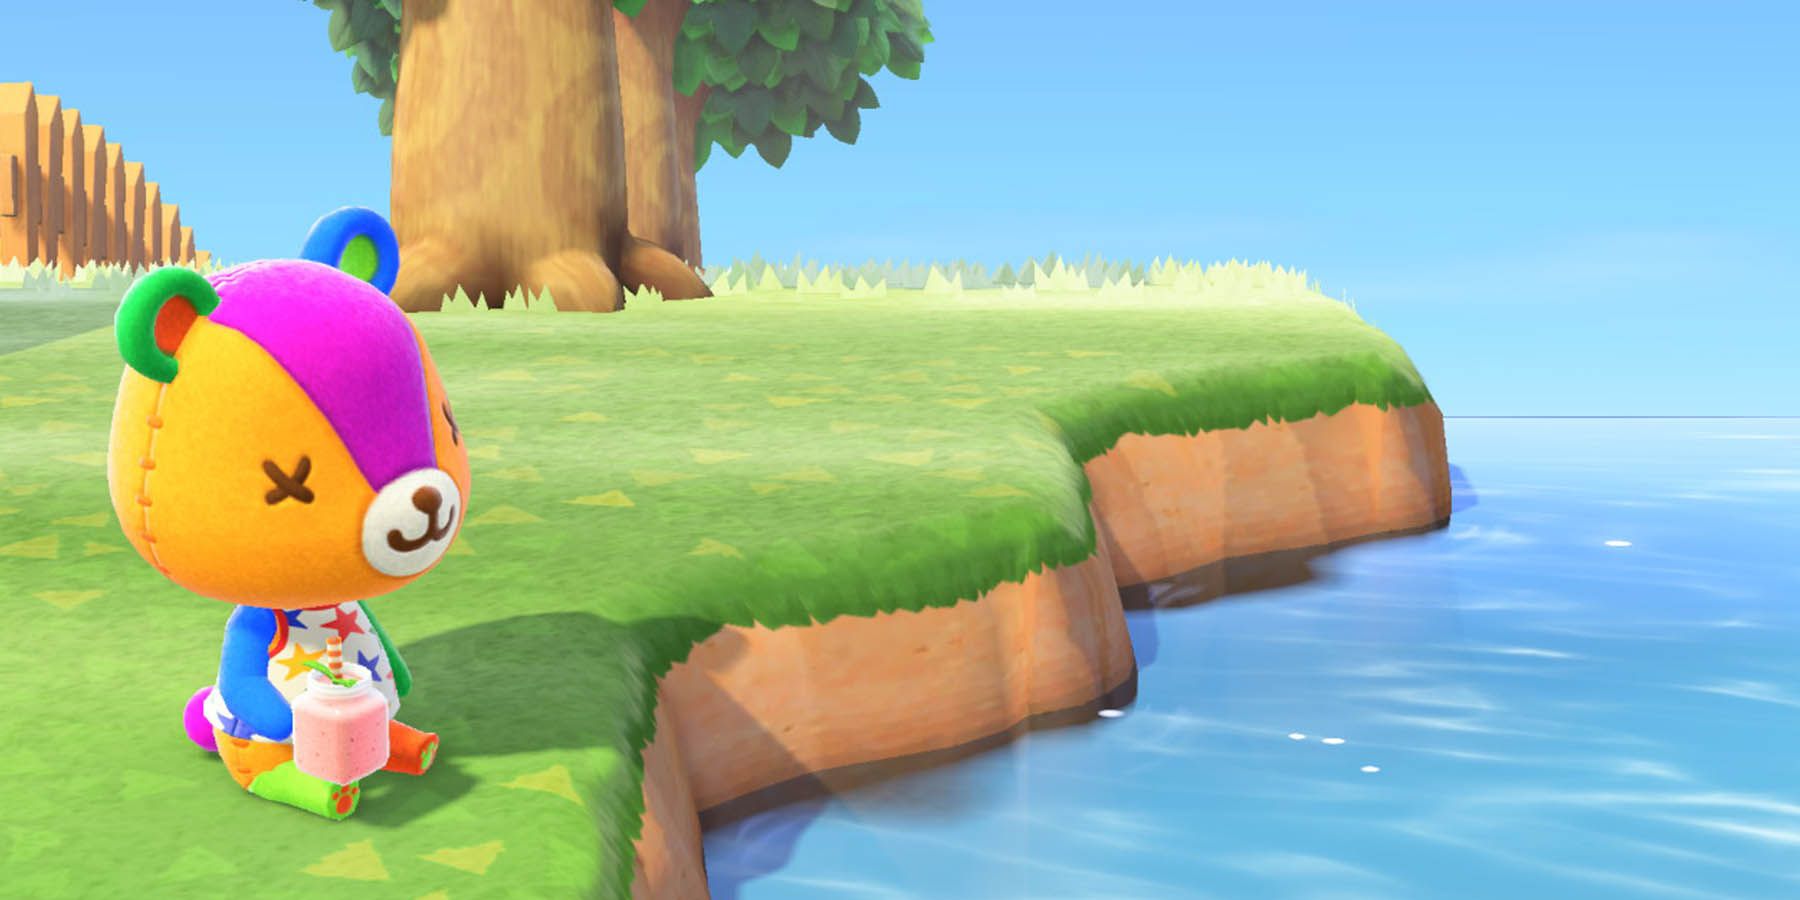 How to Build a Lake in Animal Crossing: New Horizons